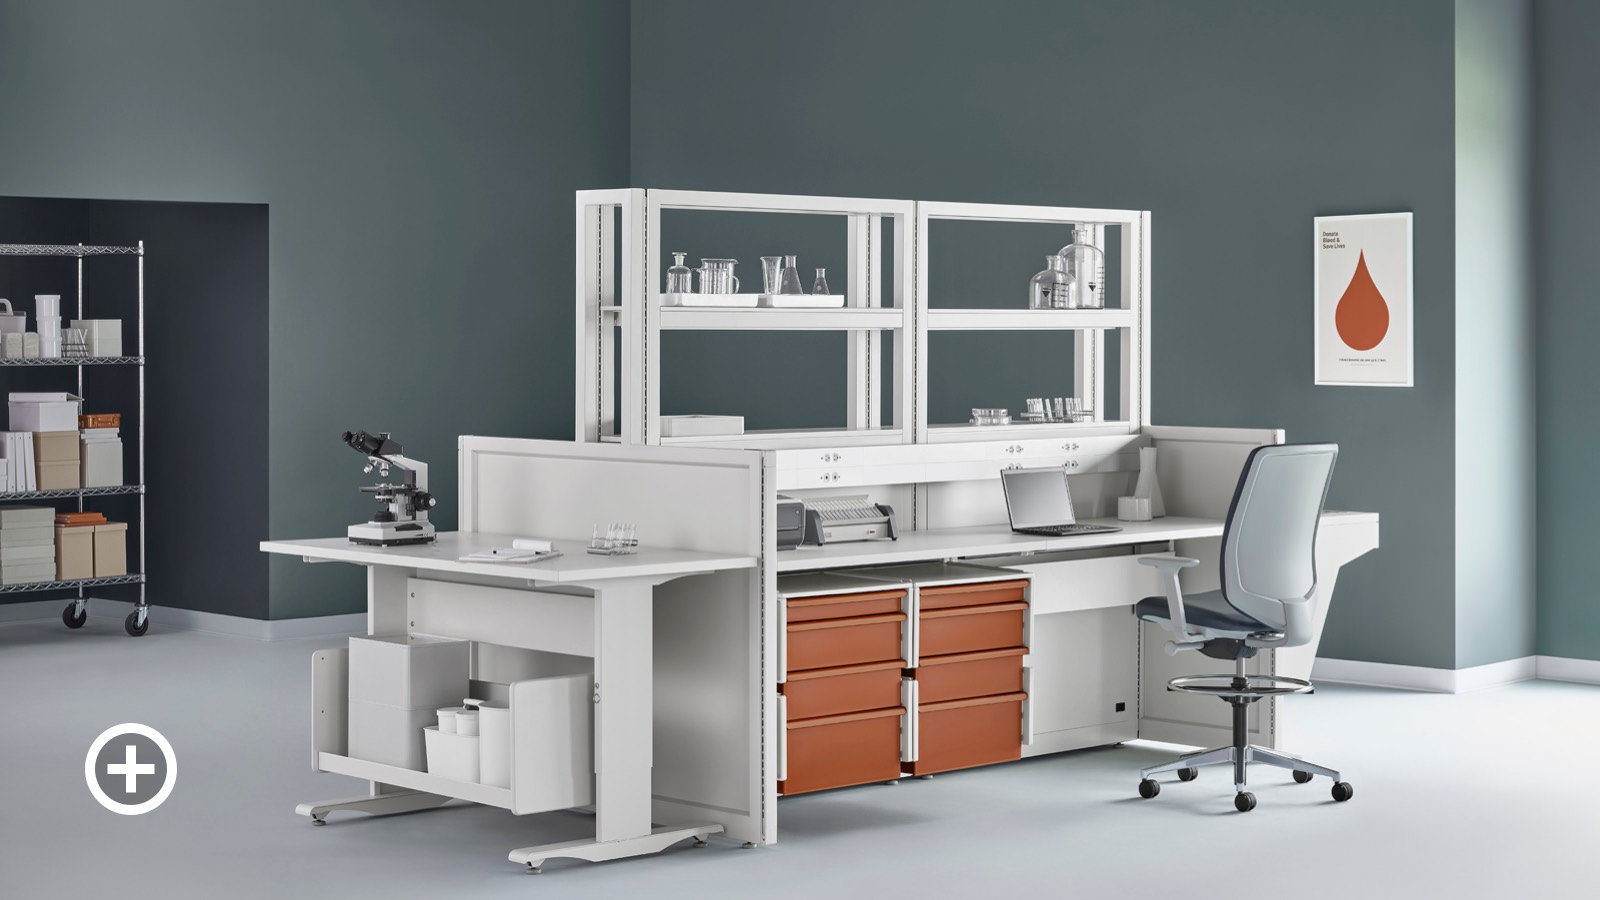 A lab setting with a Co/Struc System workstation and shelving in the center with a Verus work stool.